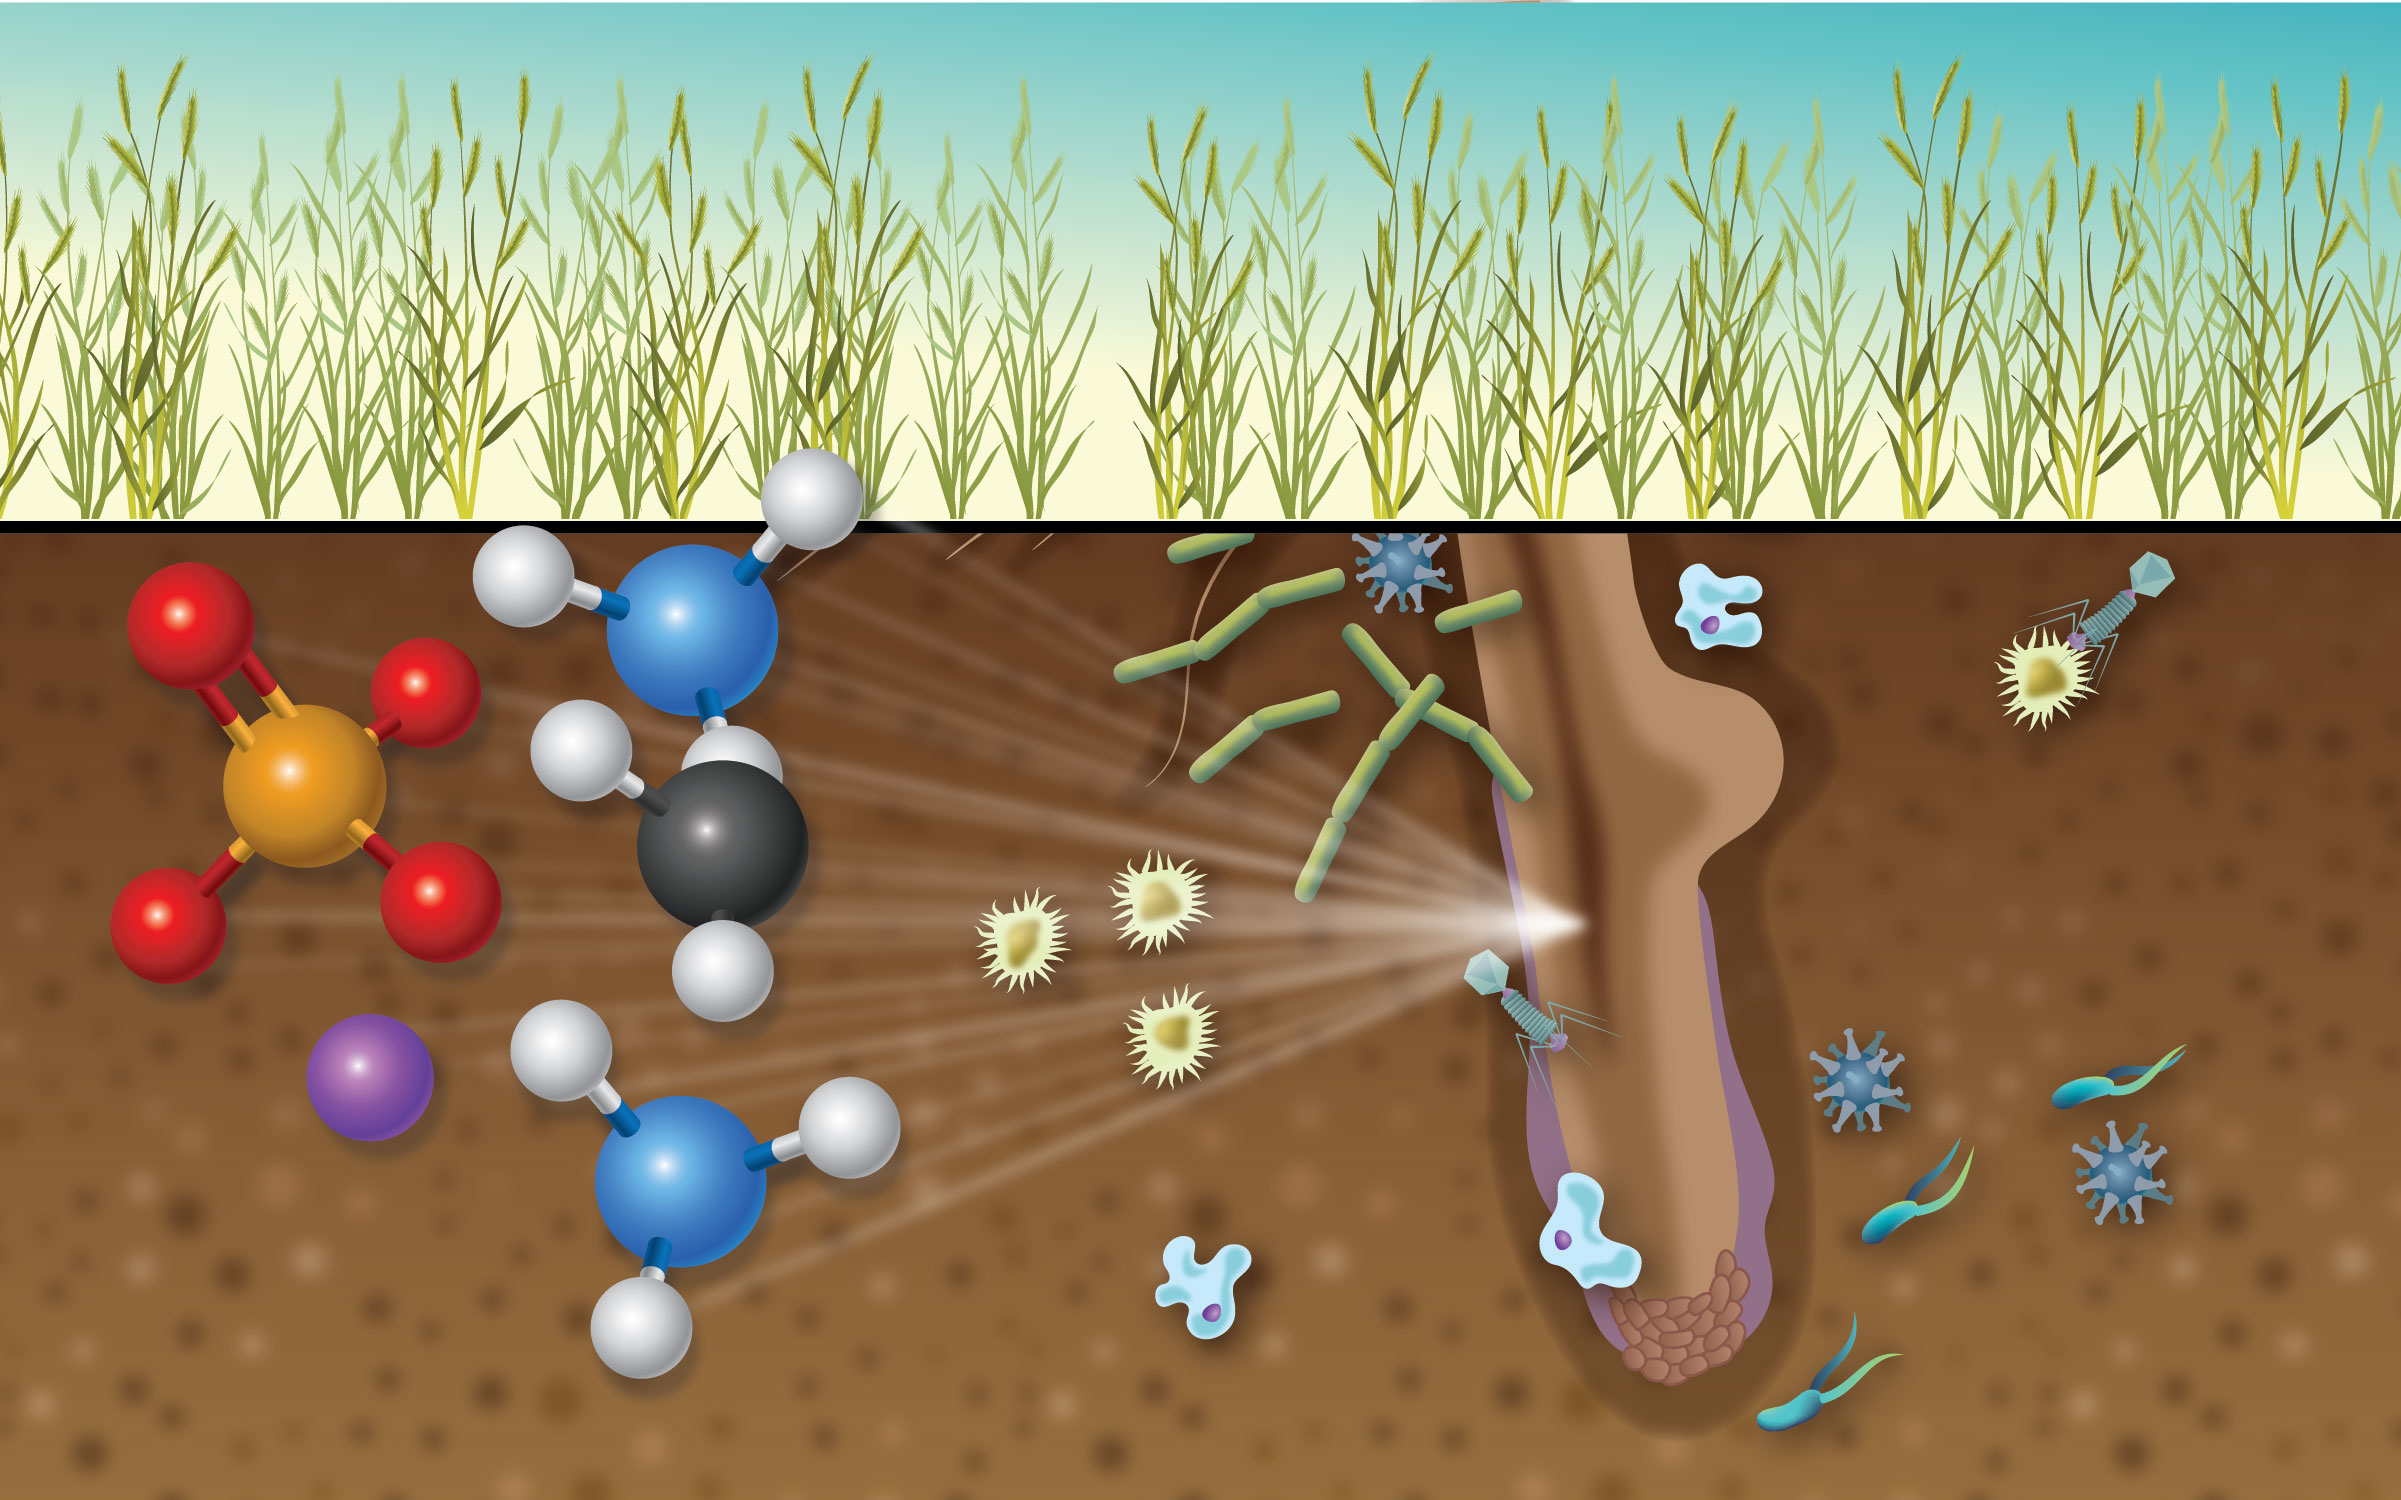 The Role of the Microbiome in Plant and Soil Health in a Changing Climate